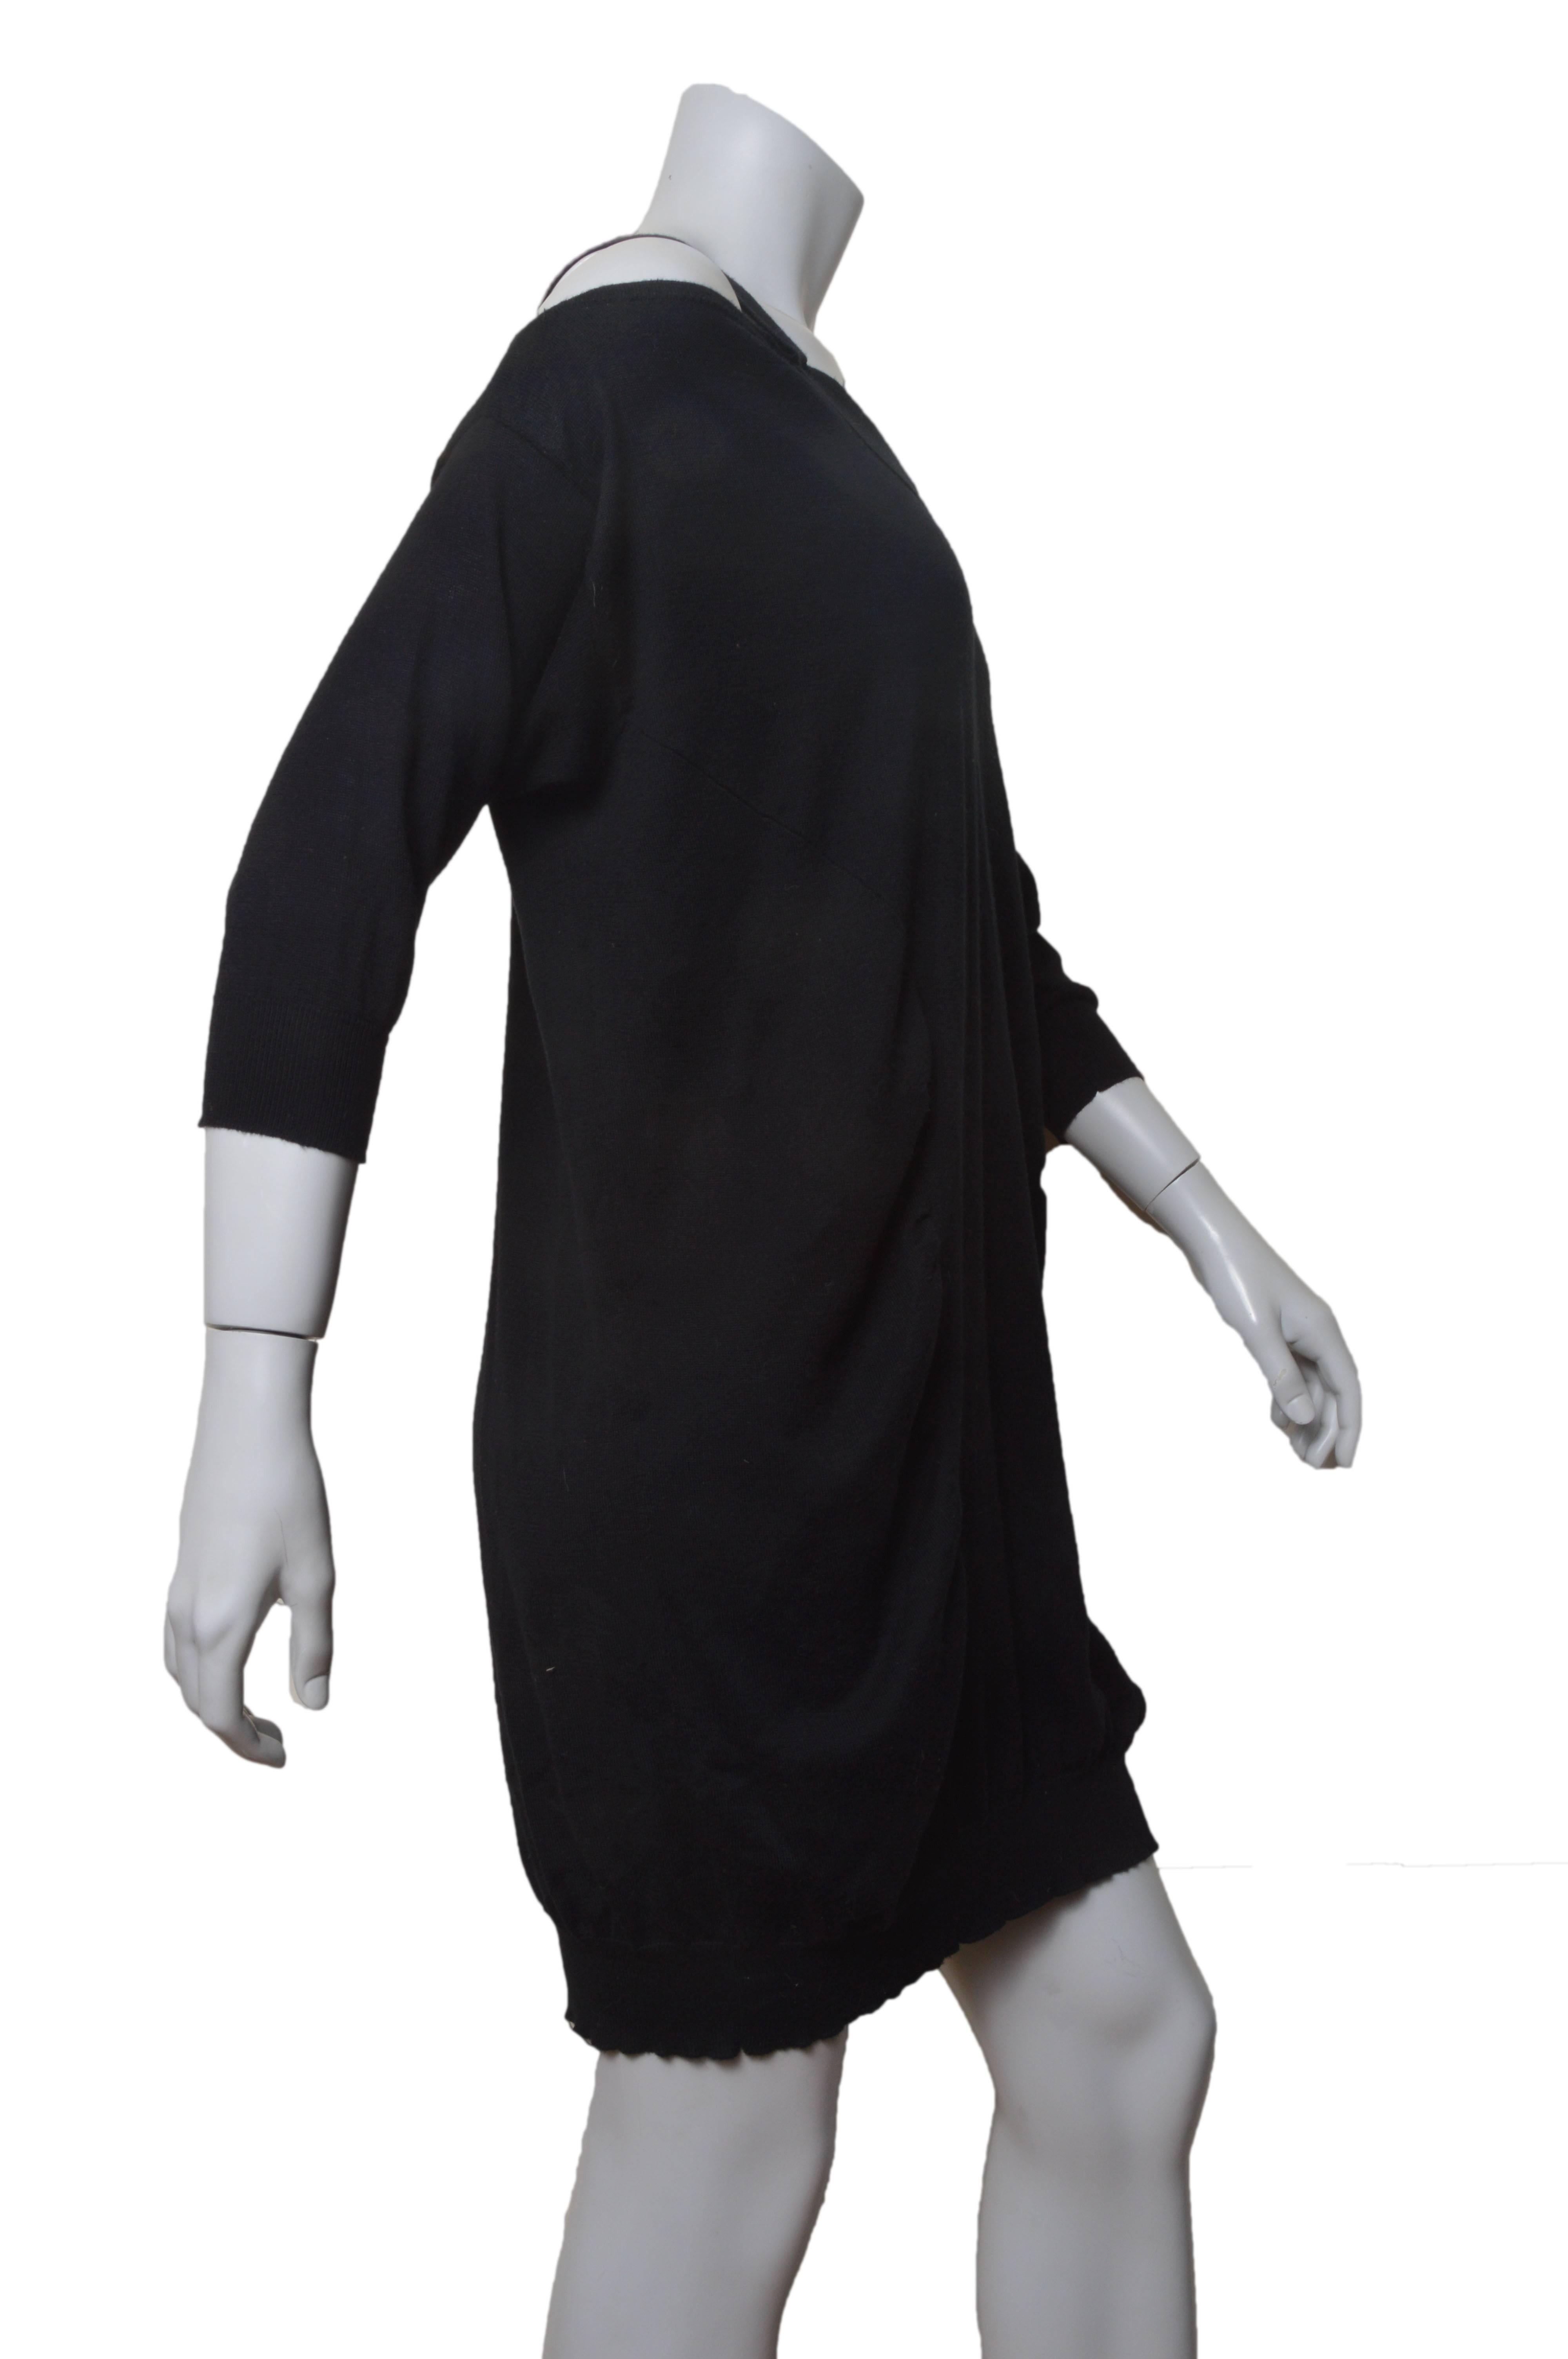 Black Miu Miu lightweight sweater dress.
Loose, slouchy fit.
Cut out shoulder detail.
Slight ruching on side panels.
Elbow length sleeves.
Banded bottom hem.
No size tag found.